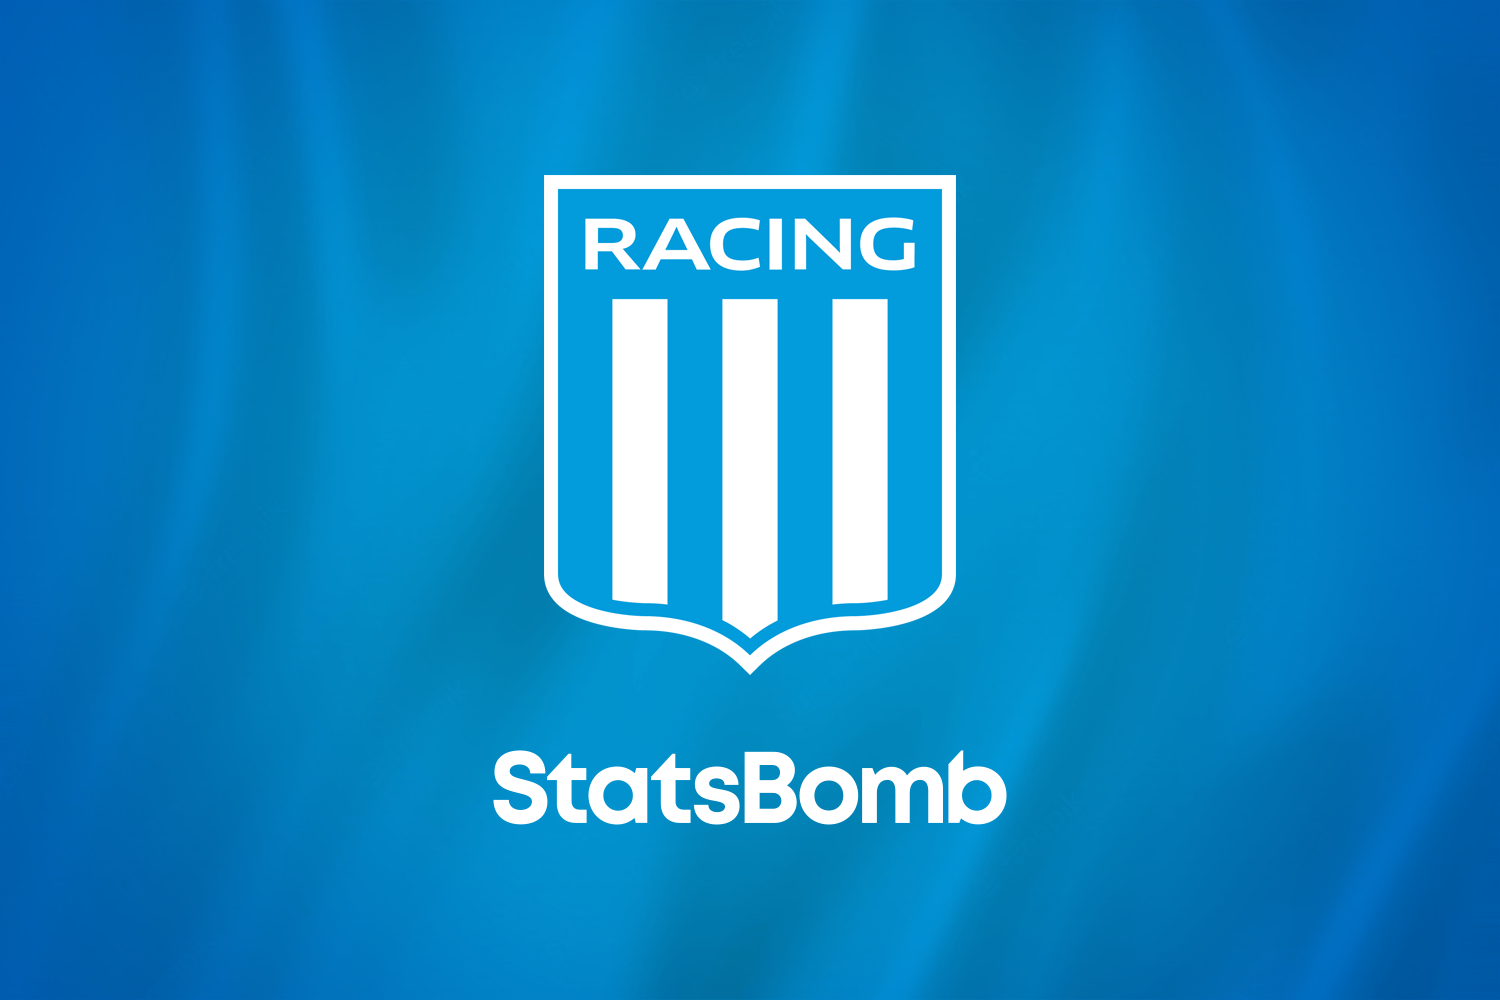 StatsBomb Enter Argentinian Market With Racing Club